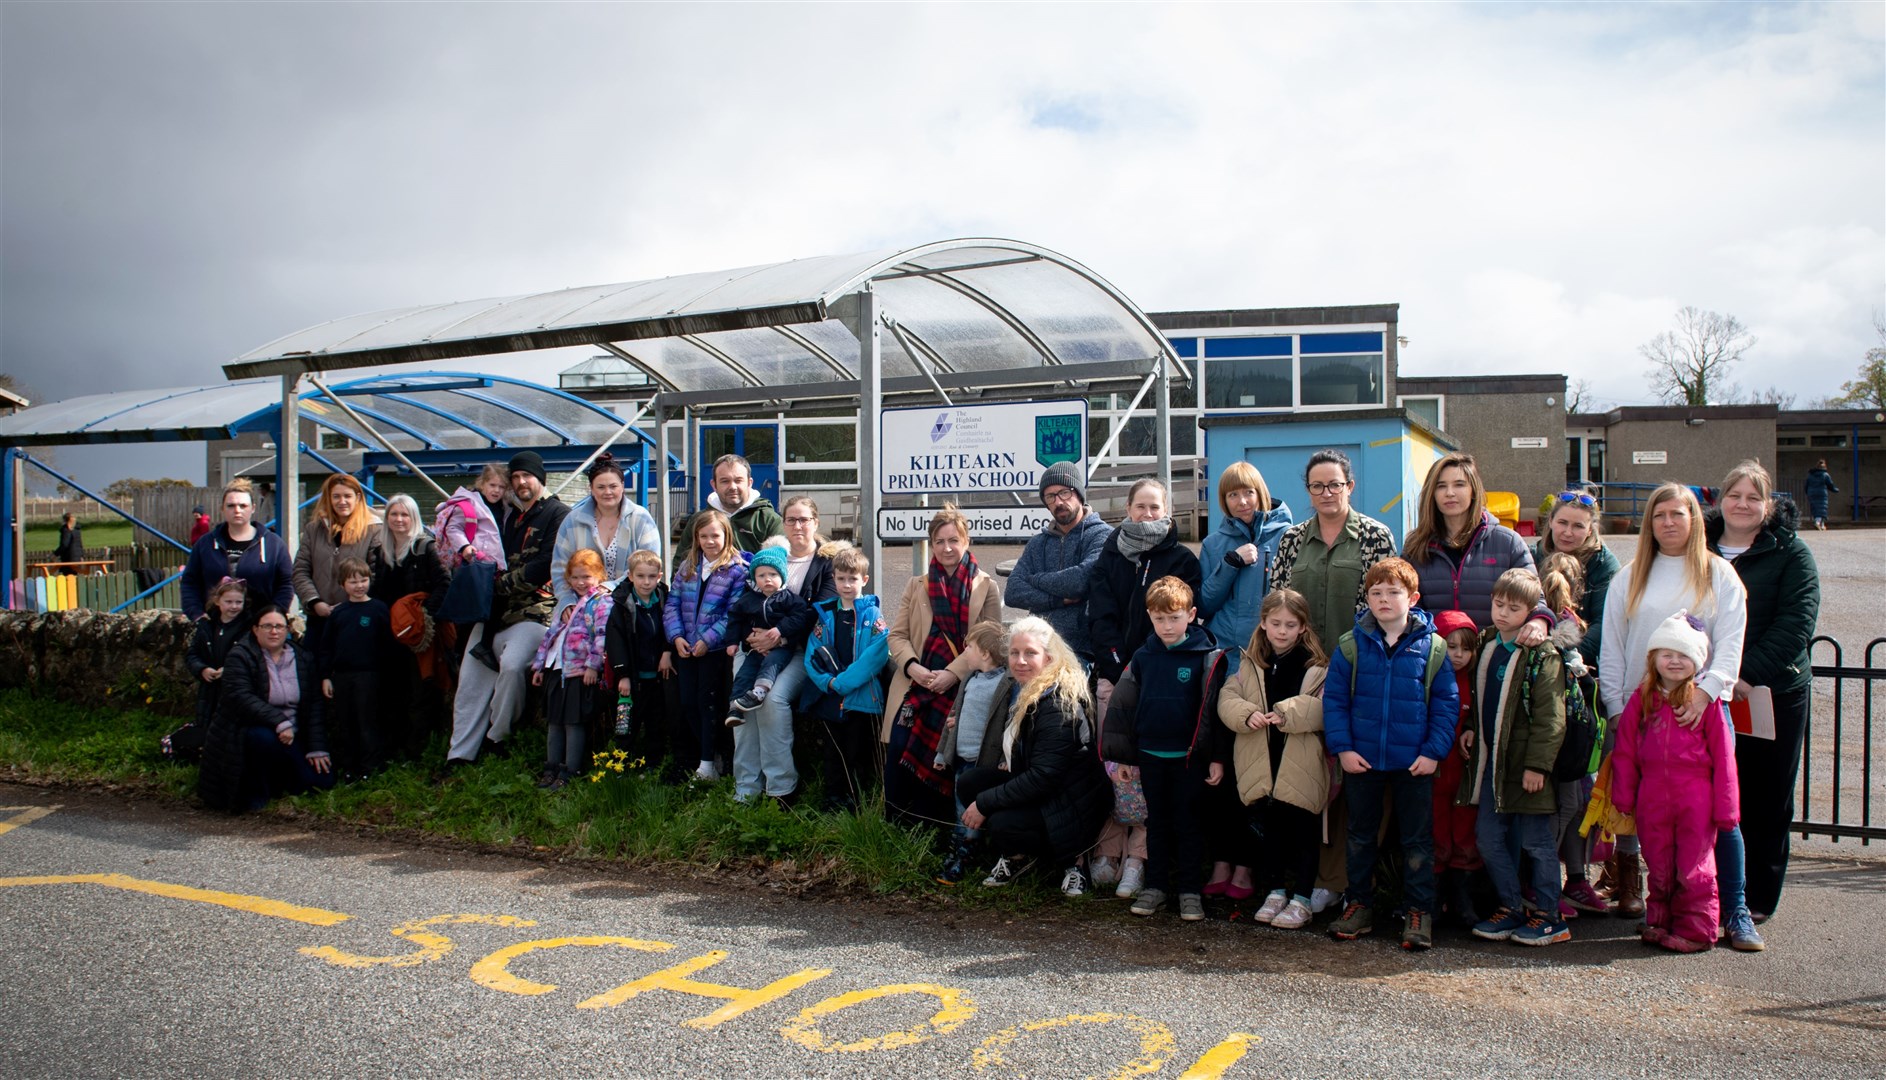 Parents and children of Kiltearn Primary in Evanton are appealing for the reinstatement of acting head teacher Steven Small. Picture: Callum Mackay.